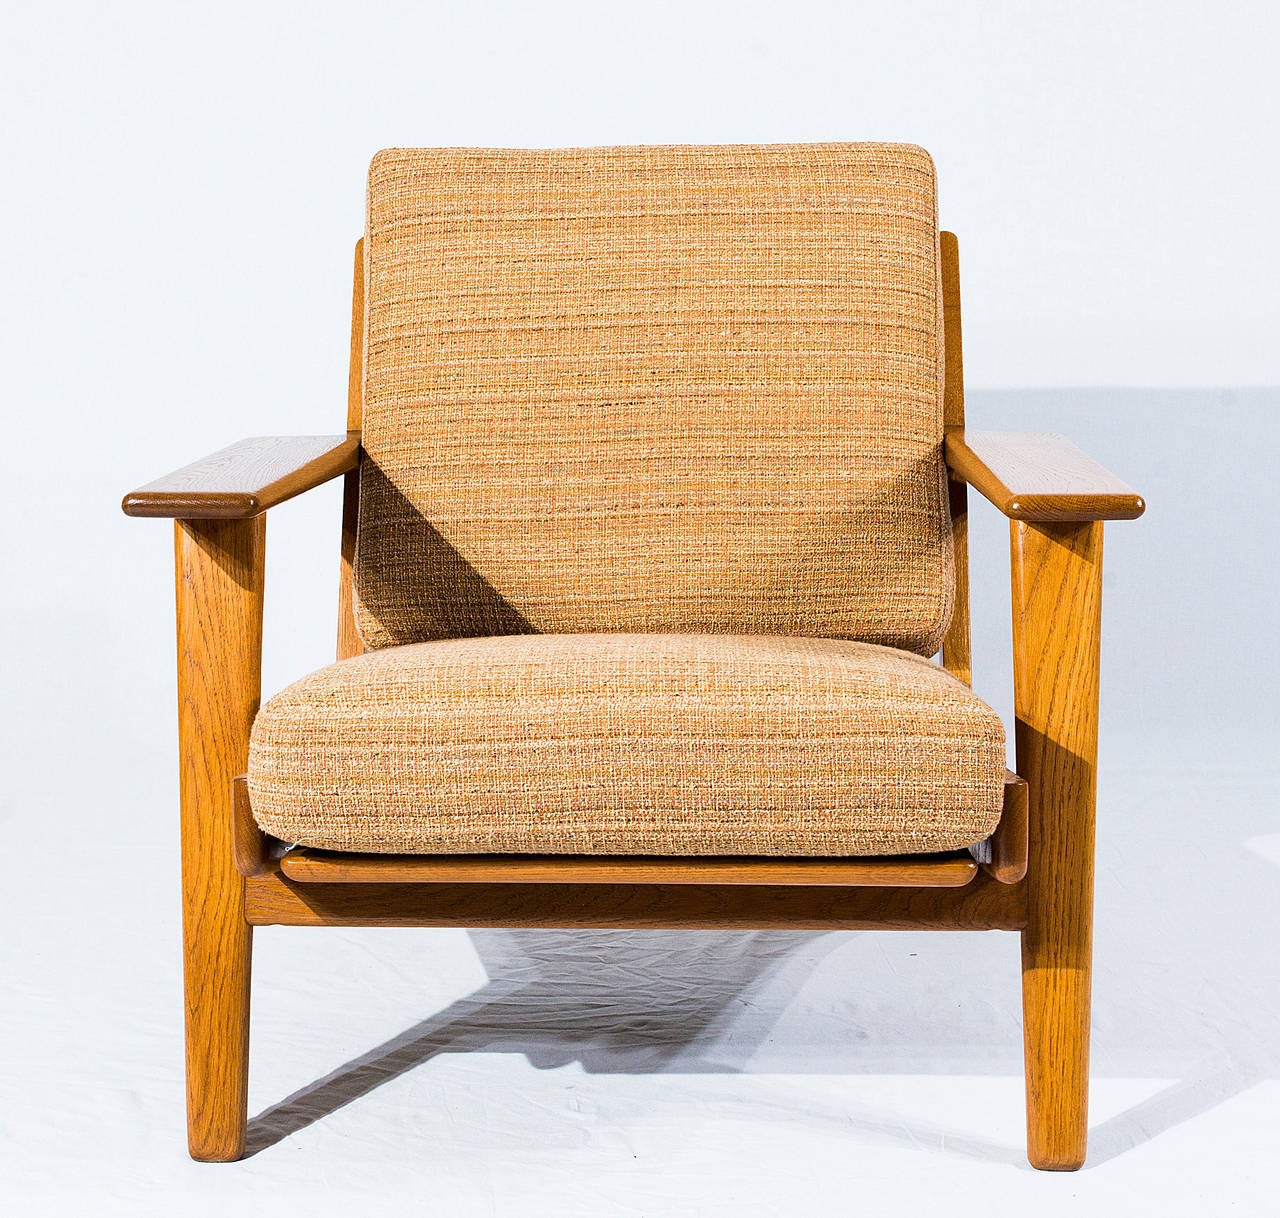 Pair of Hans Wegner GE-290 Lounge Chairs Designed in 1953 and Produced by Getama.  Store formerly known as ARTFUL DODGER INC